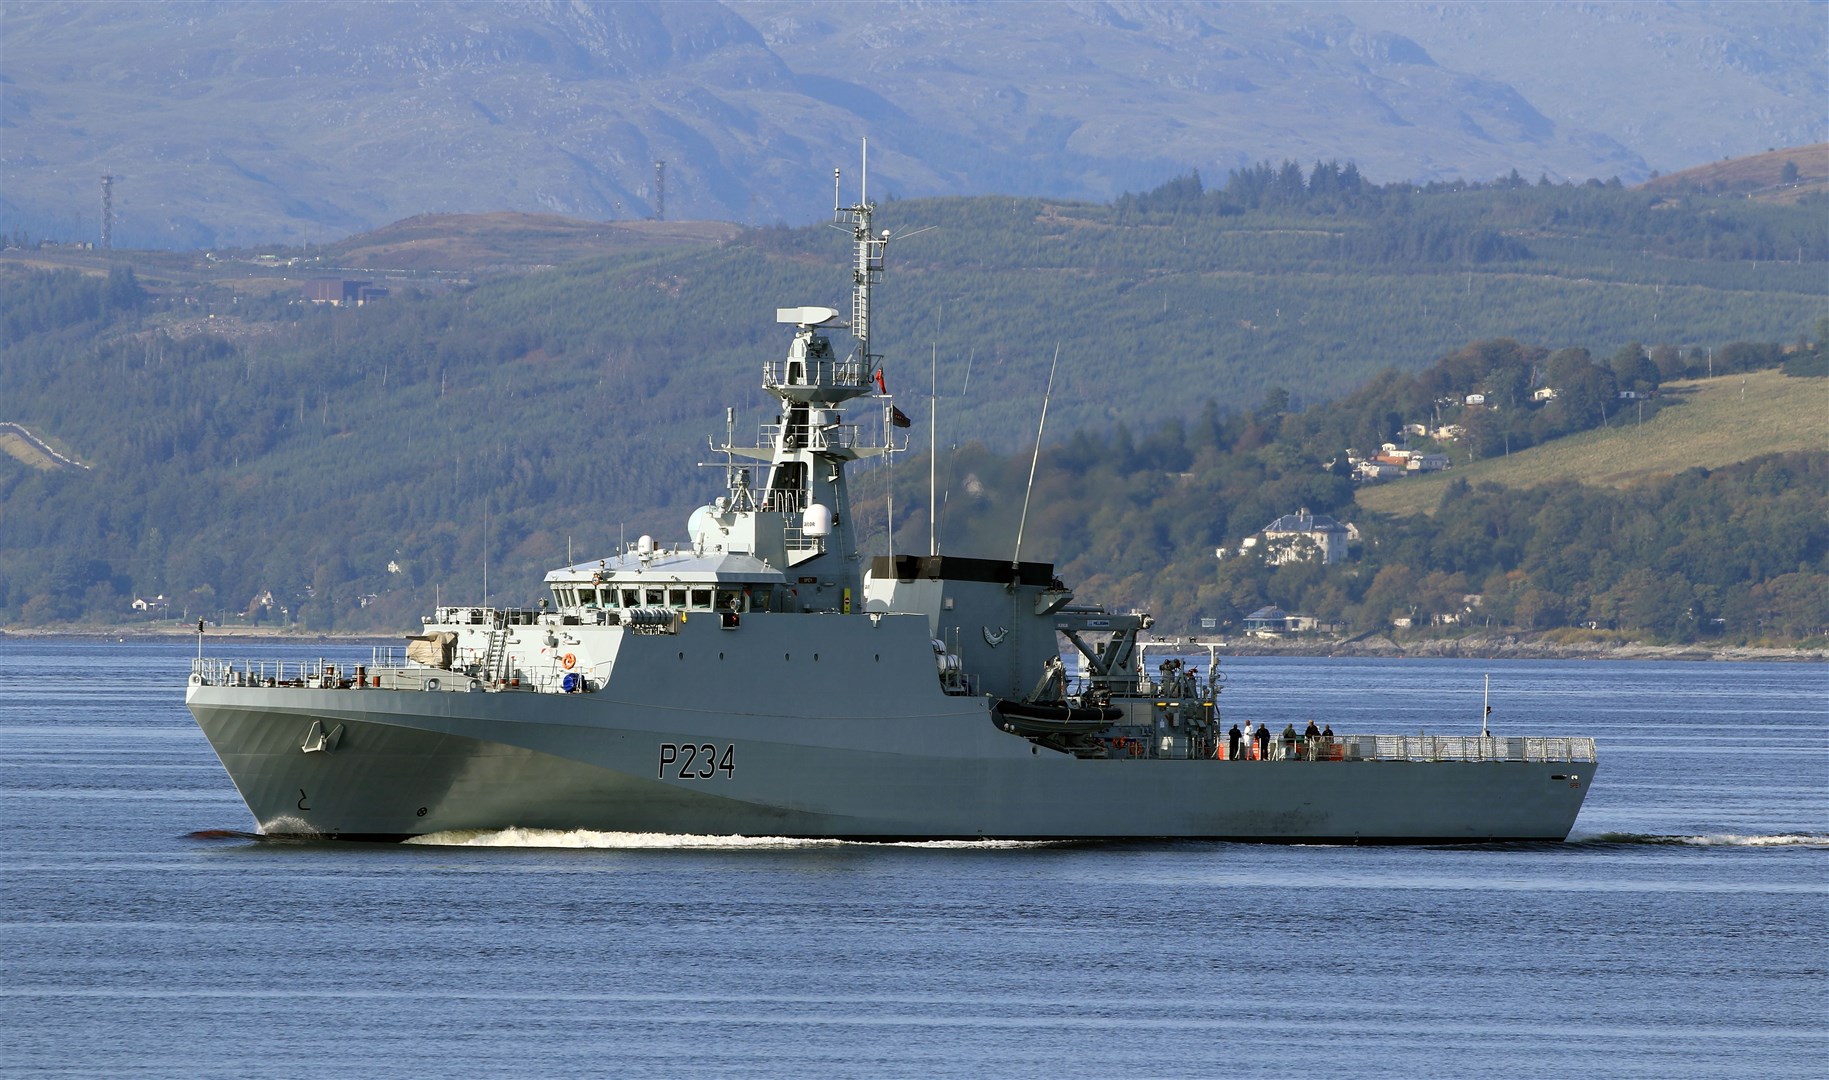 HMS Spey on maiden sea trials in the Firth of Clyde